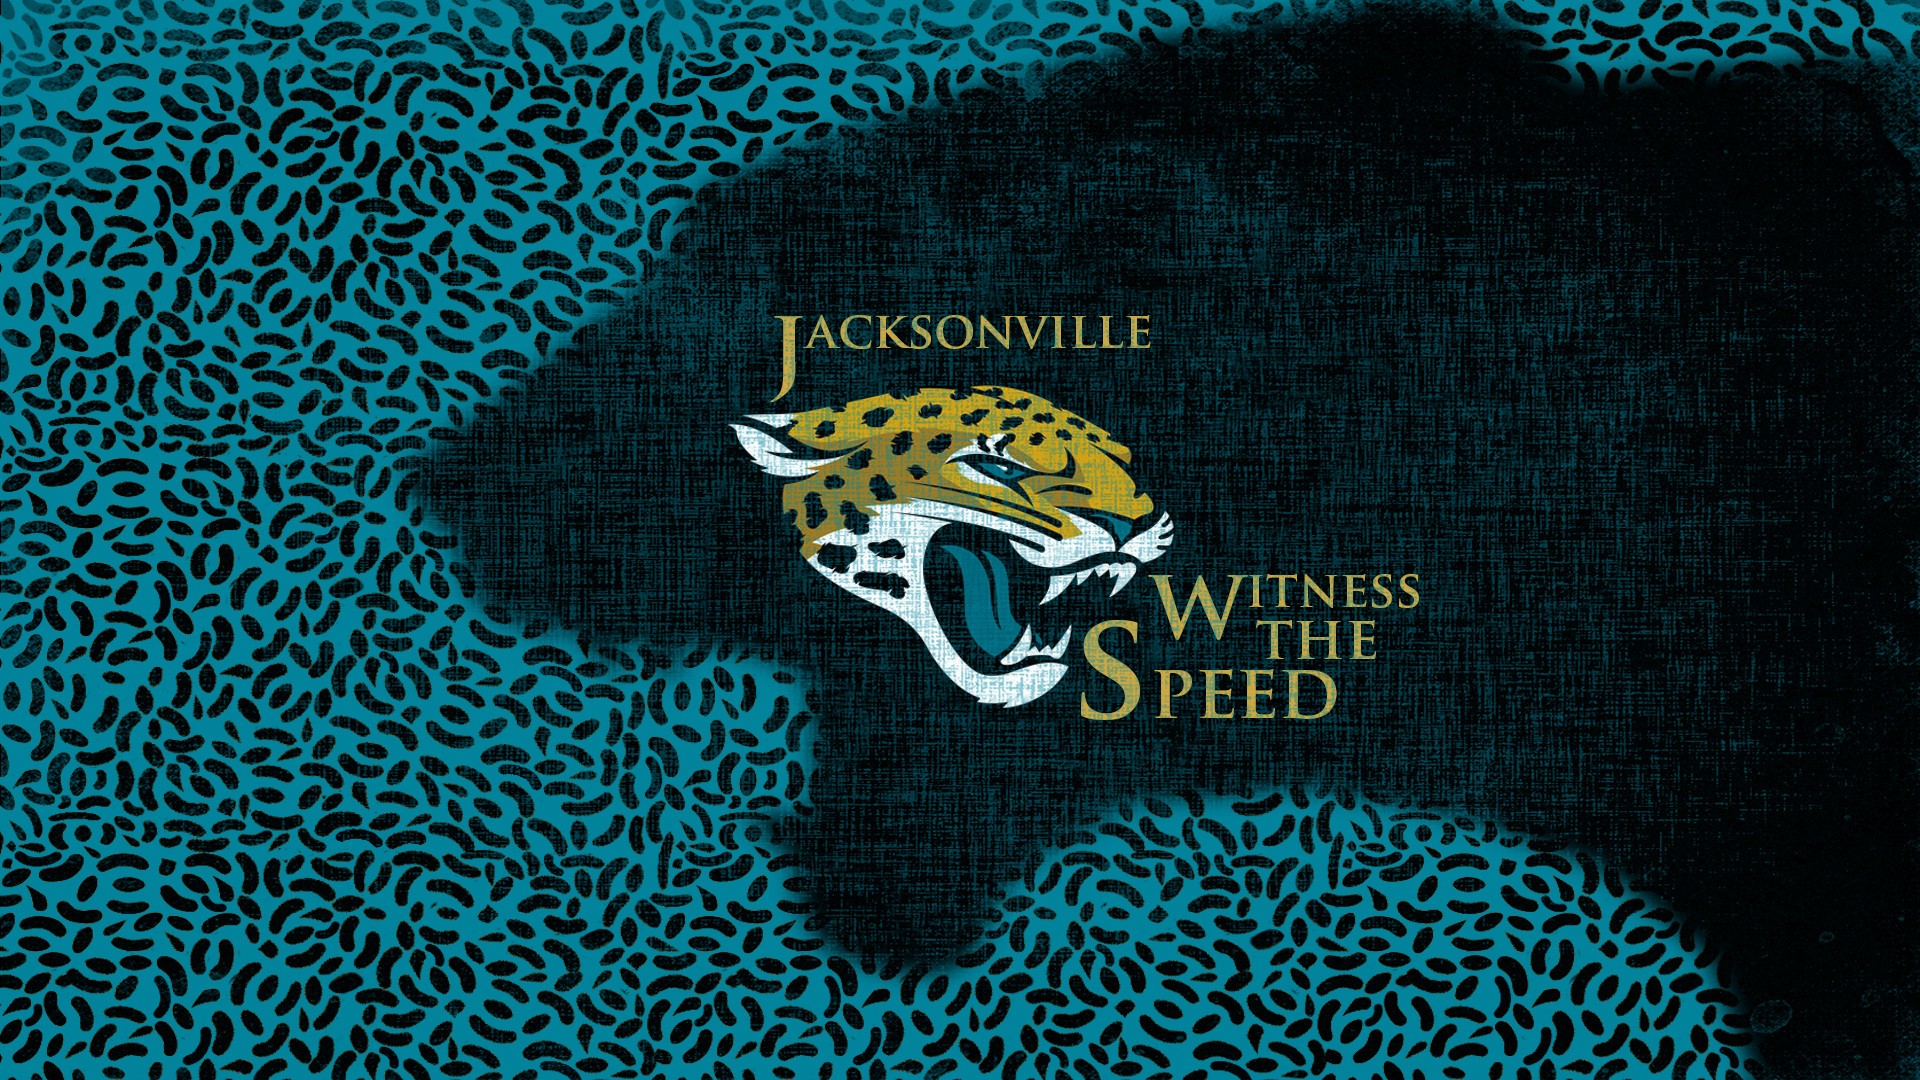 Wallpapers HD Jacksonville Jaguars NFL With high-resolution 1920X1080 pixel. You can use this wallpaper for your Mac or Windows Desktop Background, iPhone, Android or Tablet and another Smartphone device